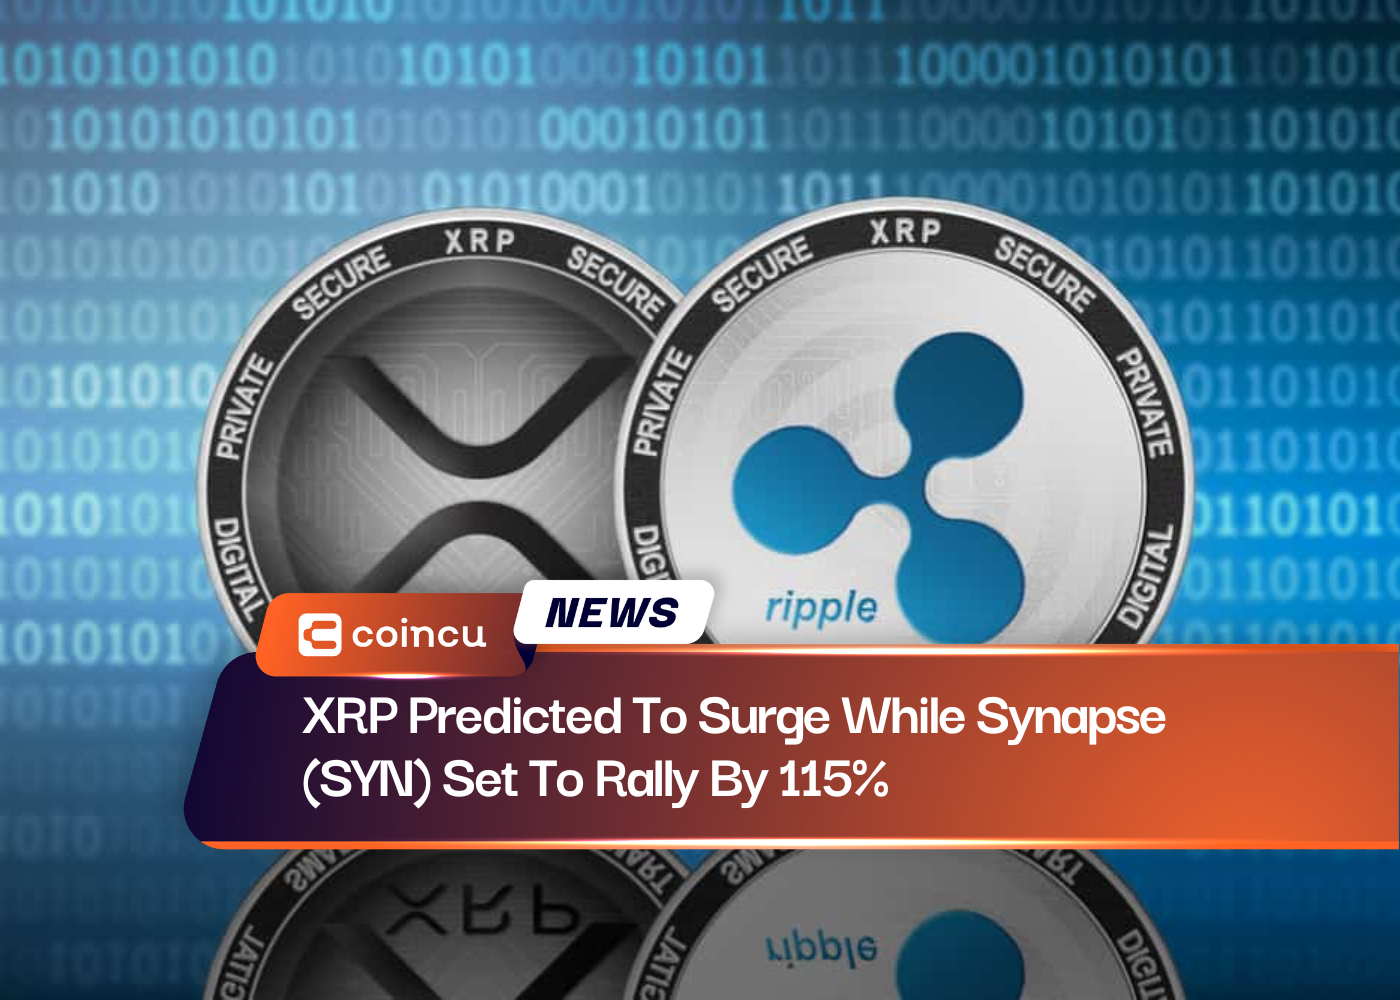 XRP Predicted To Surge While Synapse (SYN) Set To Rally By 115%